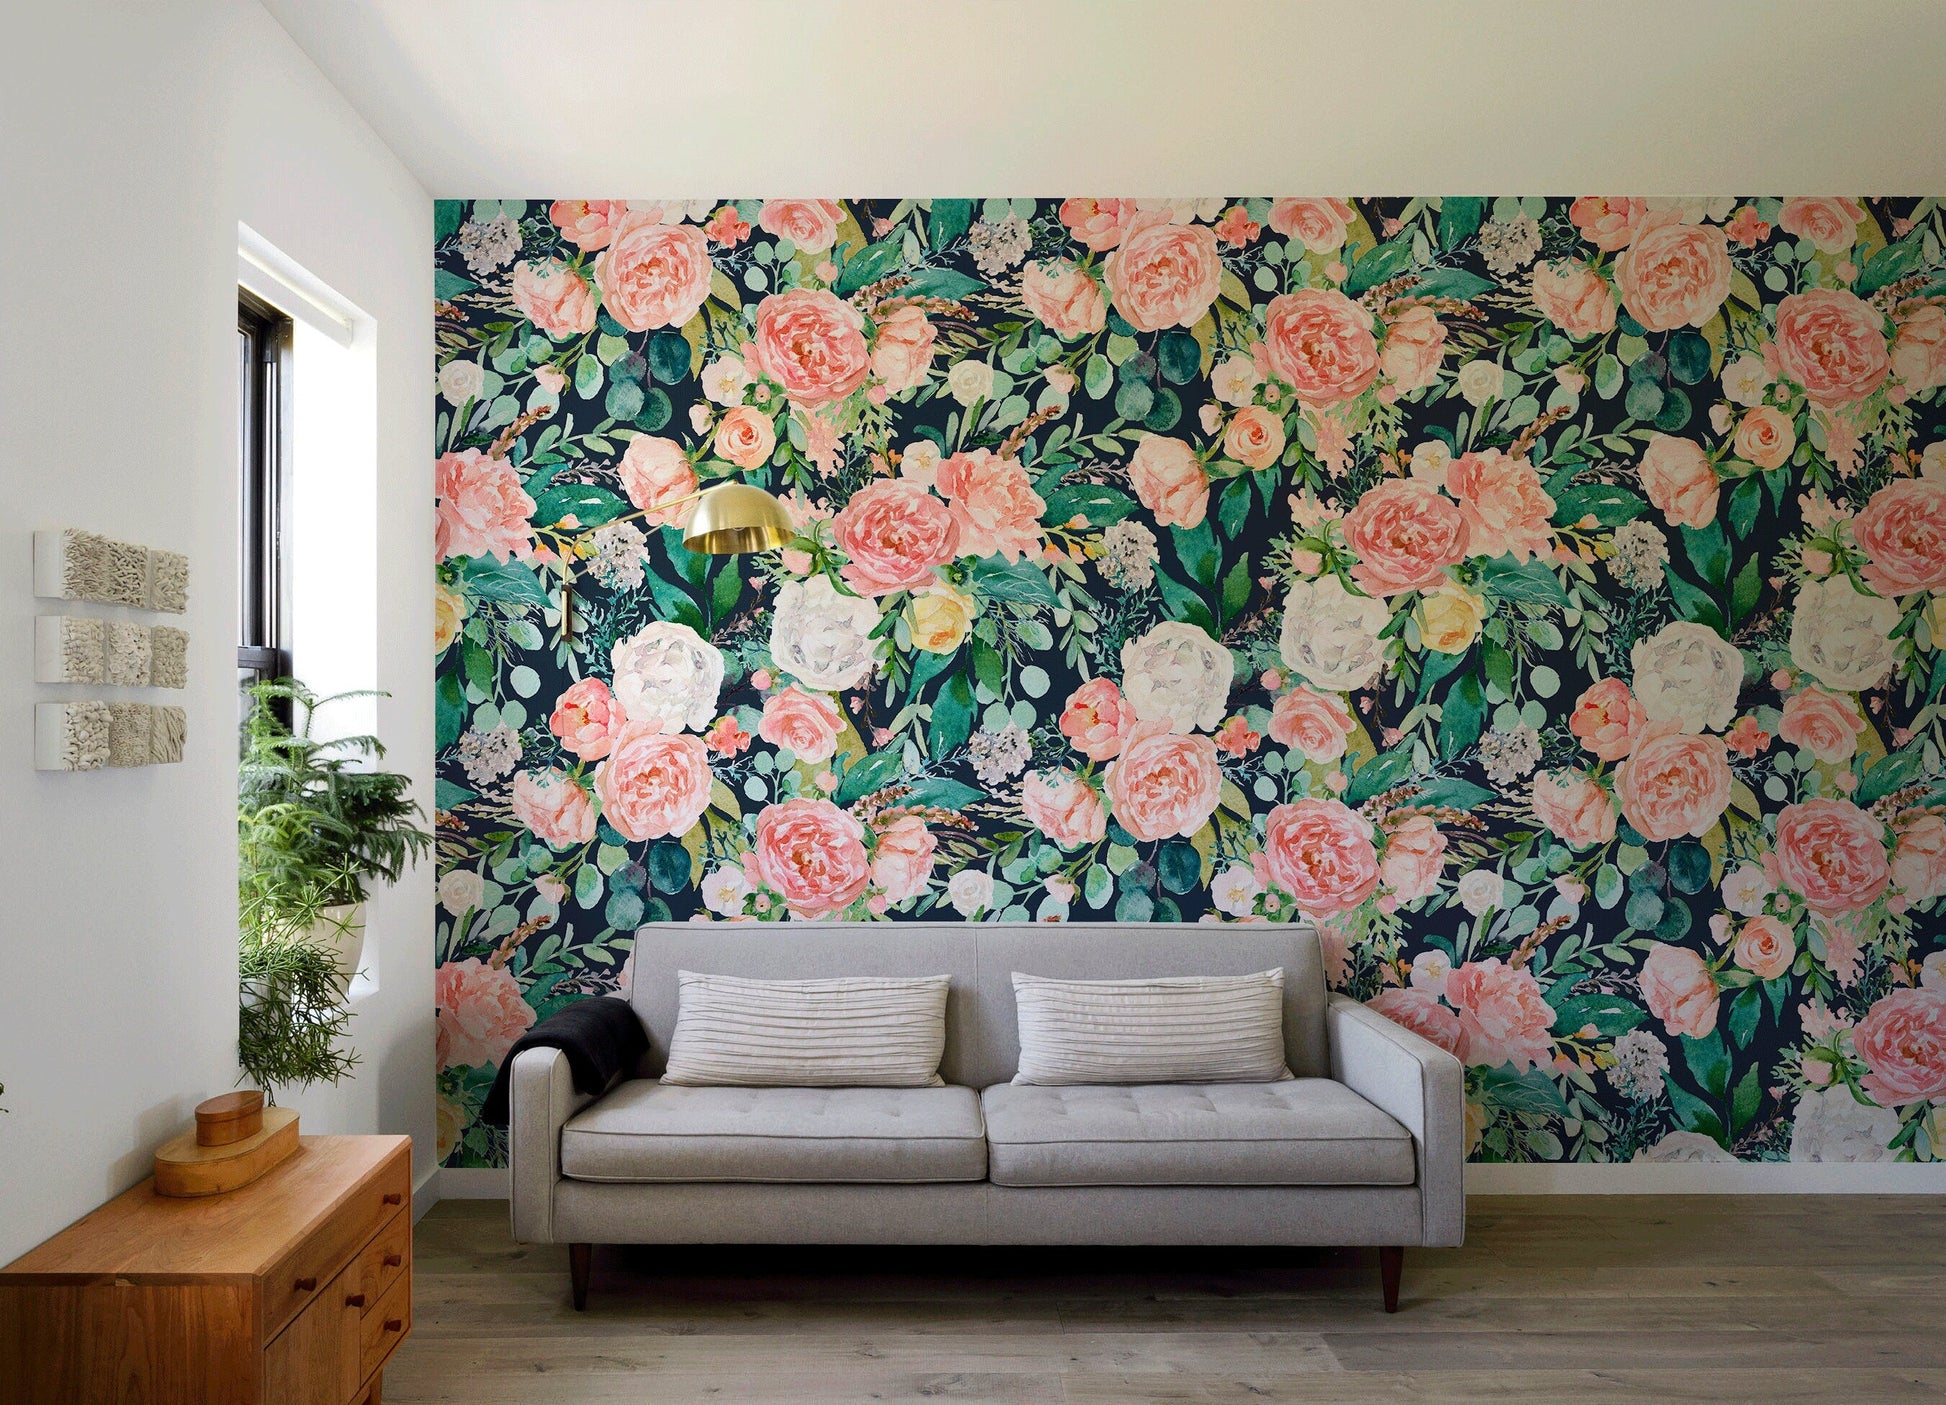 Vintage Peony Wallpaper, Colorful Peony Wallpapers, Peel and Stick Wallpaper, Fabric Wallpaper, Wall Paper Removable, Wallpaper - A827